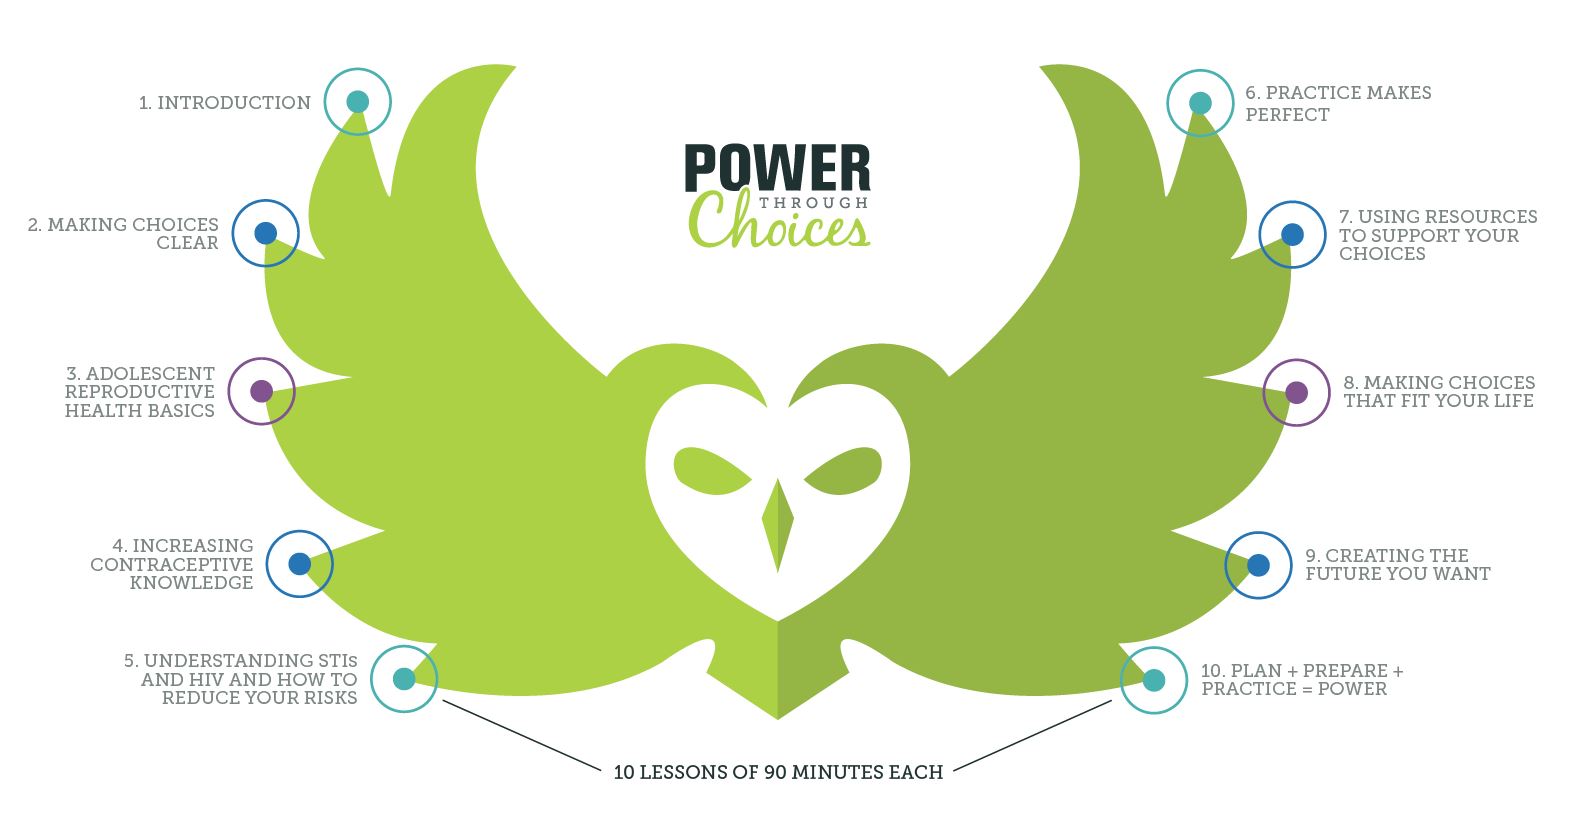 Image of owl from Power Through Choices logo, with the 10 lessons identified from the curriculum